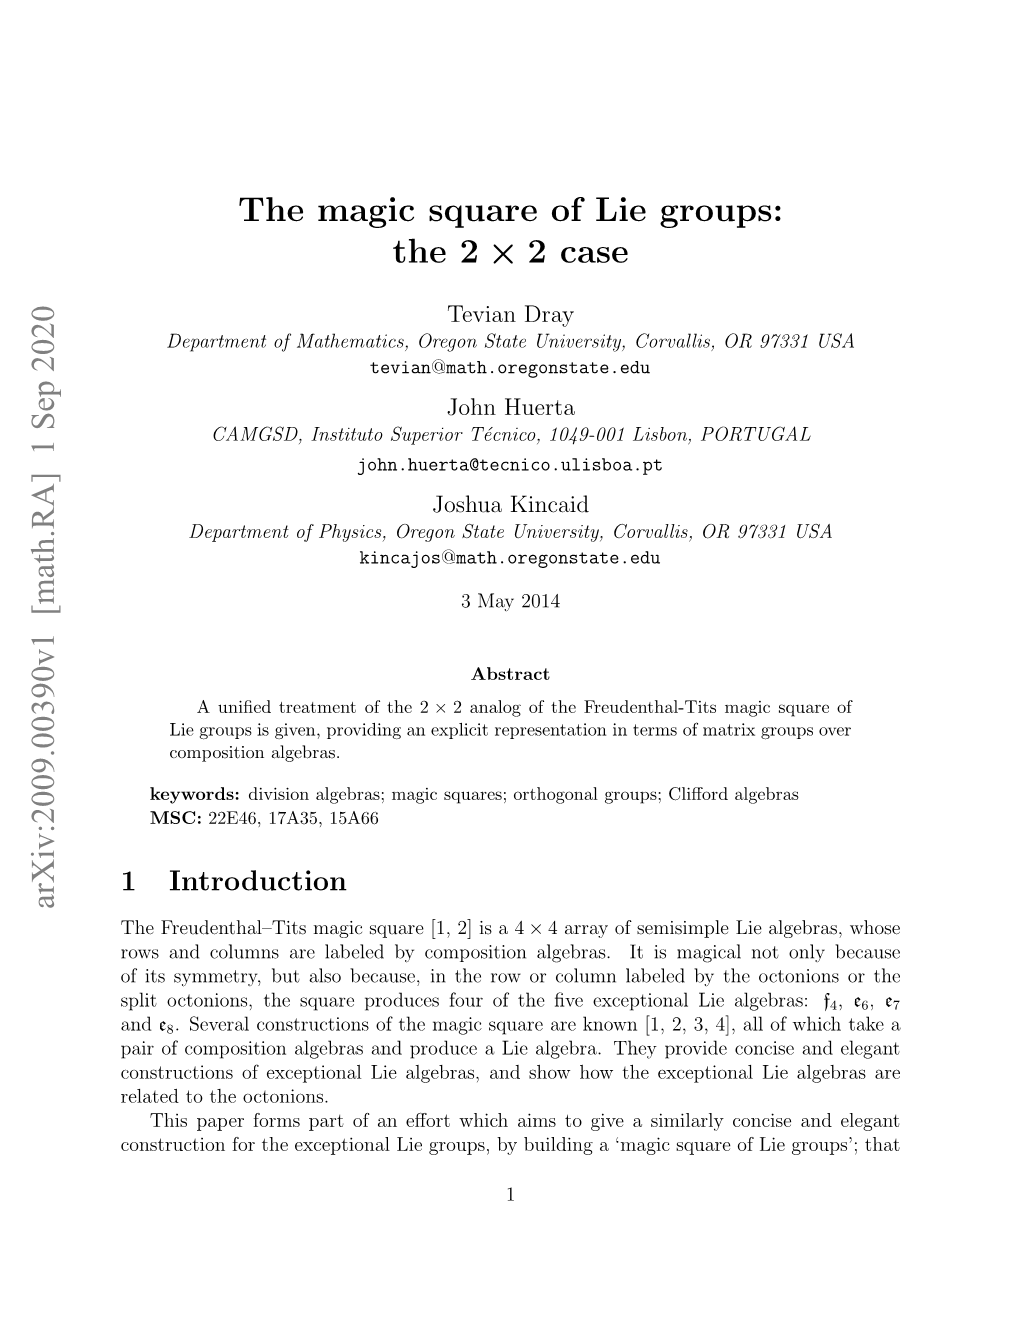 The Magic Square of Lie Groups: the $2\Times 2$ Case